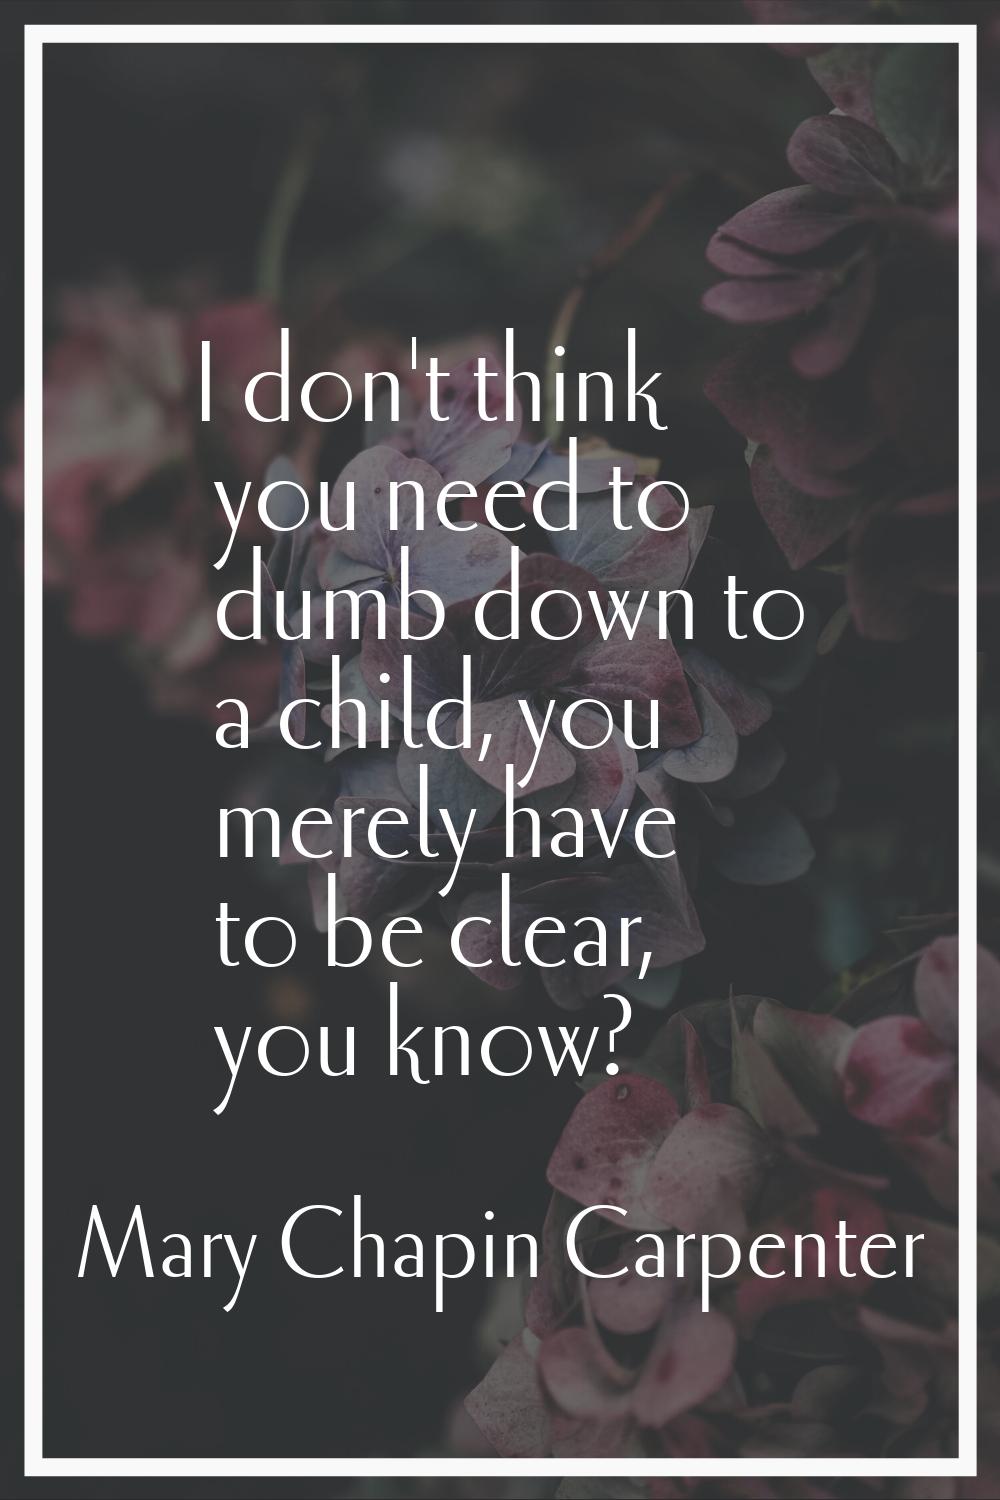 I don't think you need to dumb down to a child, you merely have to be clear, you know?